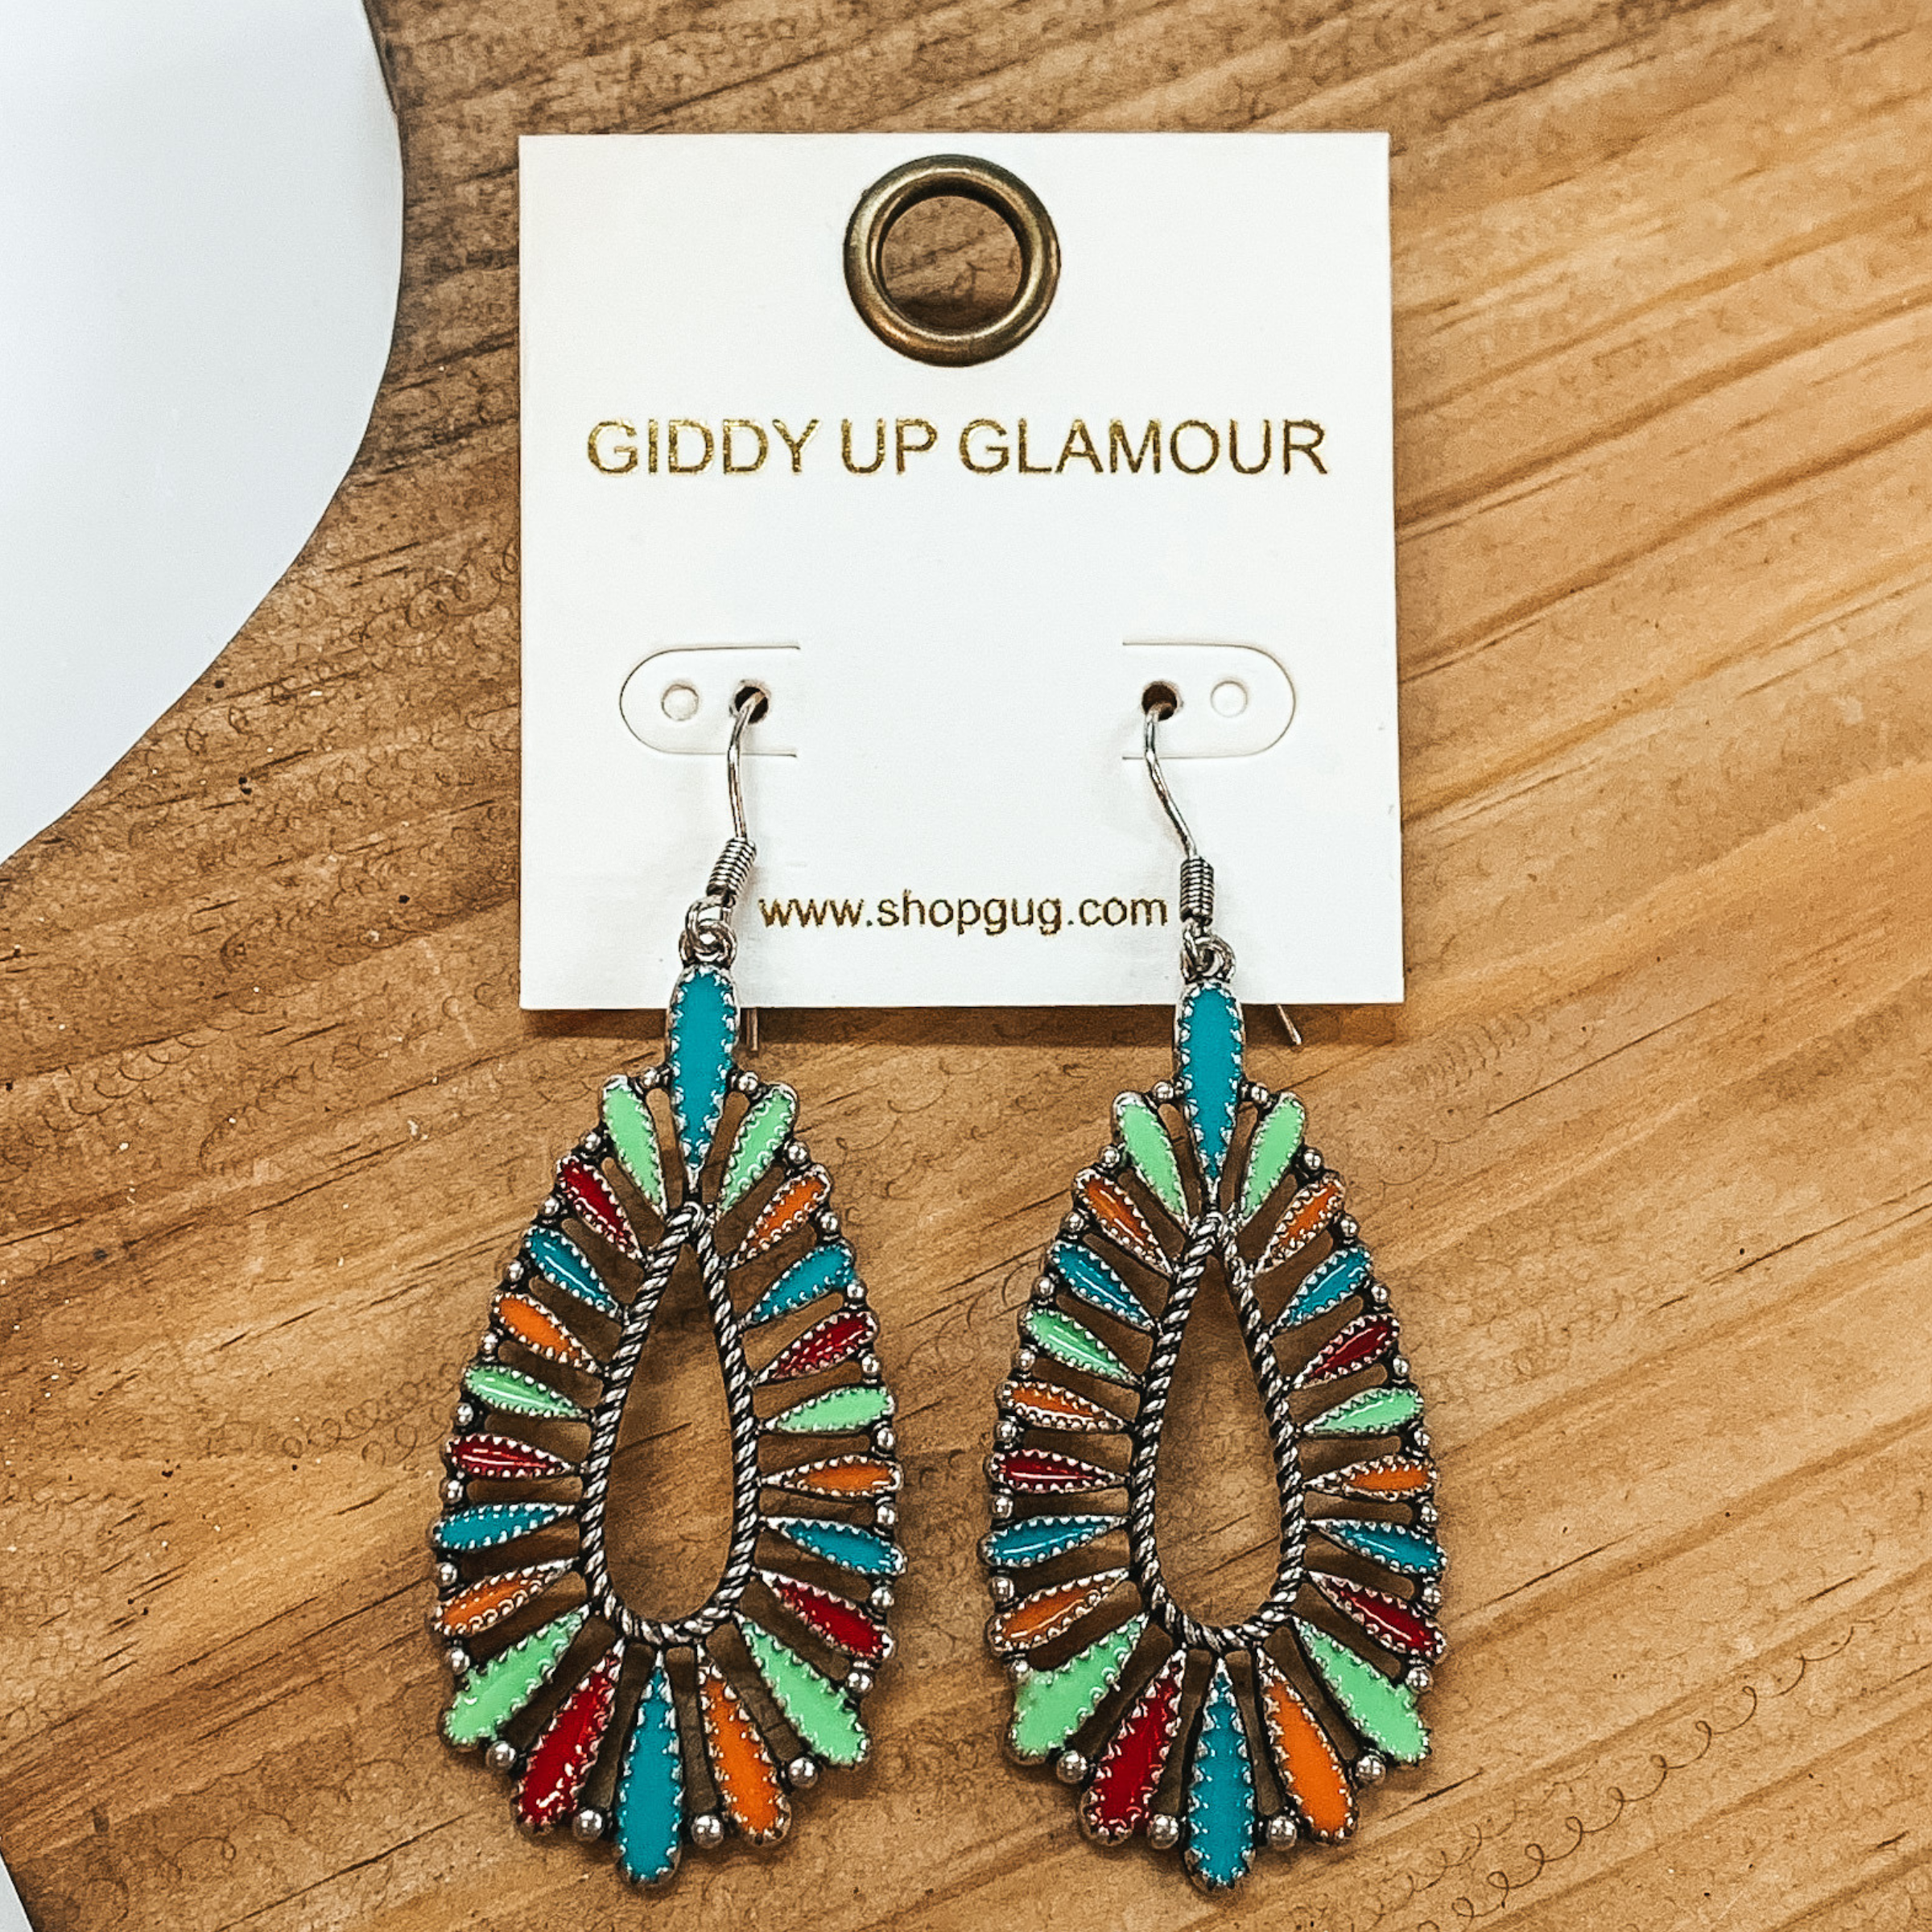 Teardrop earrings in multicolored needle points.  Colors in turquoise, green, orange, and red with a  silver outline. These earrings are pictured on a  brown block and white background.